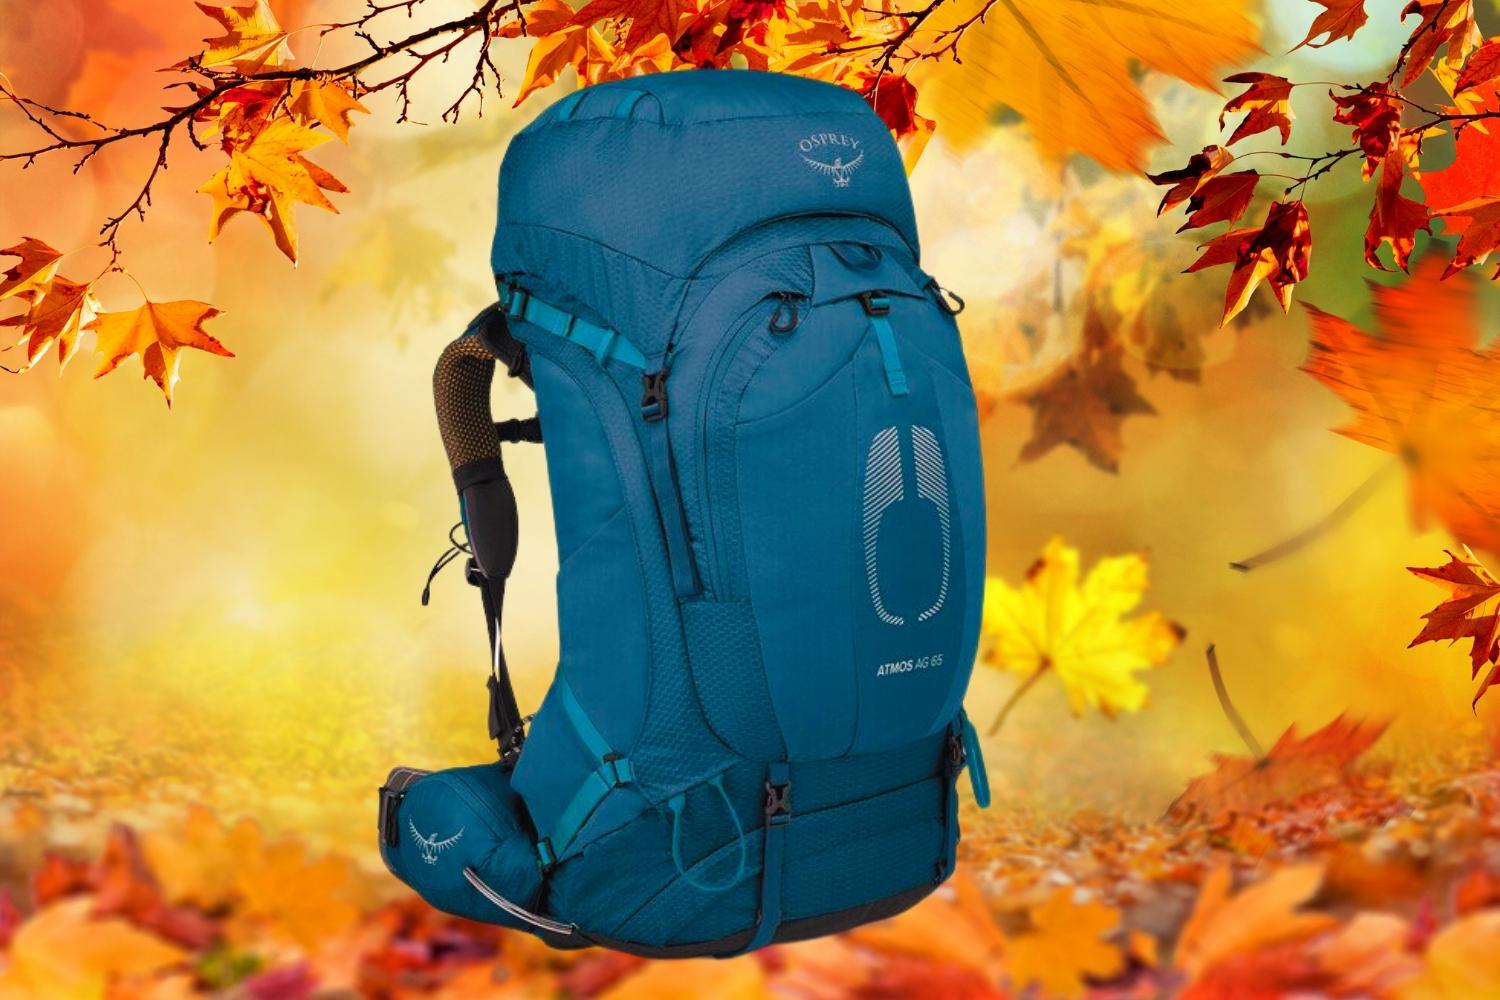 1. BEST OVERALL HIKING BACKPACK: OSPREY ATMOS AG 65